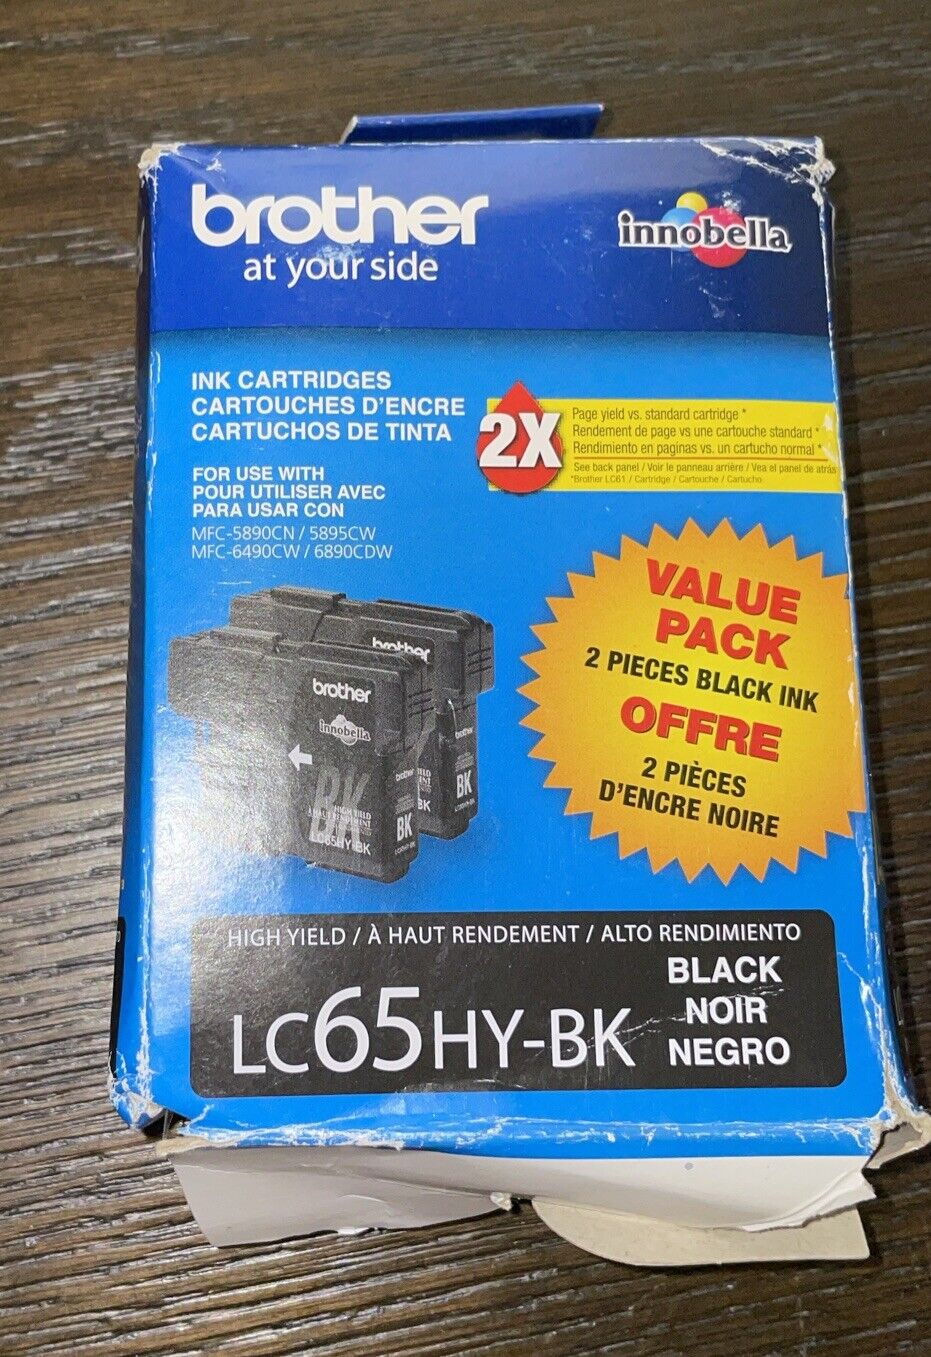 Brother LC65HY-BK Black Ink Cartridges 2-Pack High Yield LC65HY-BK NEW IN BOX